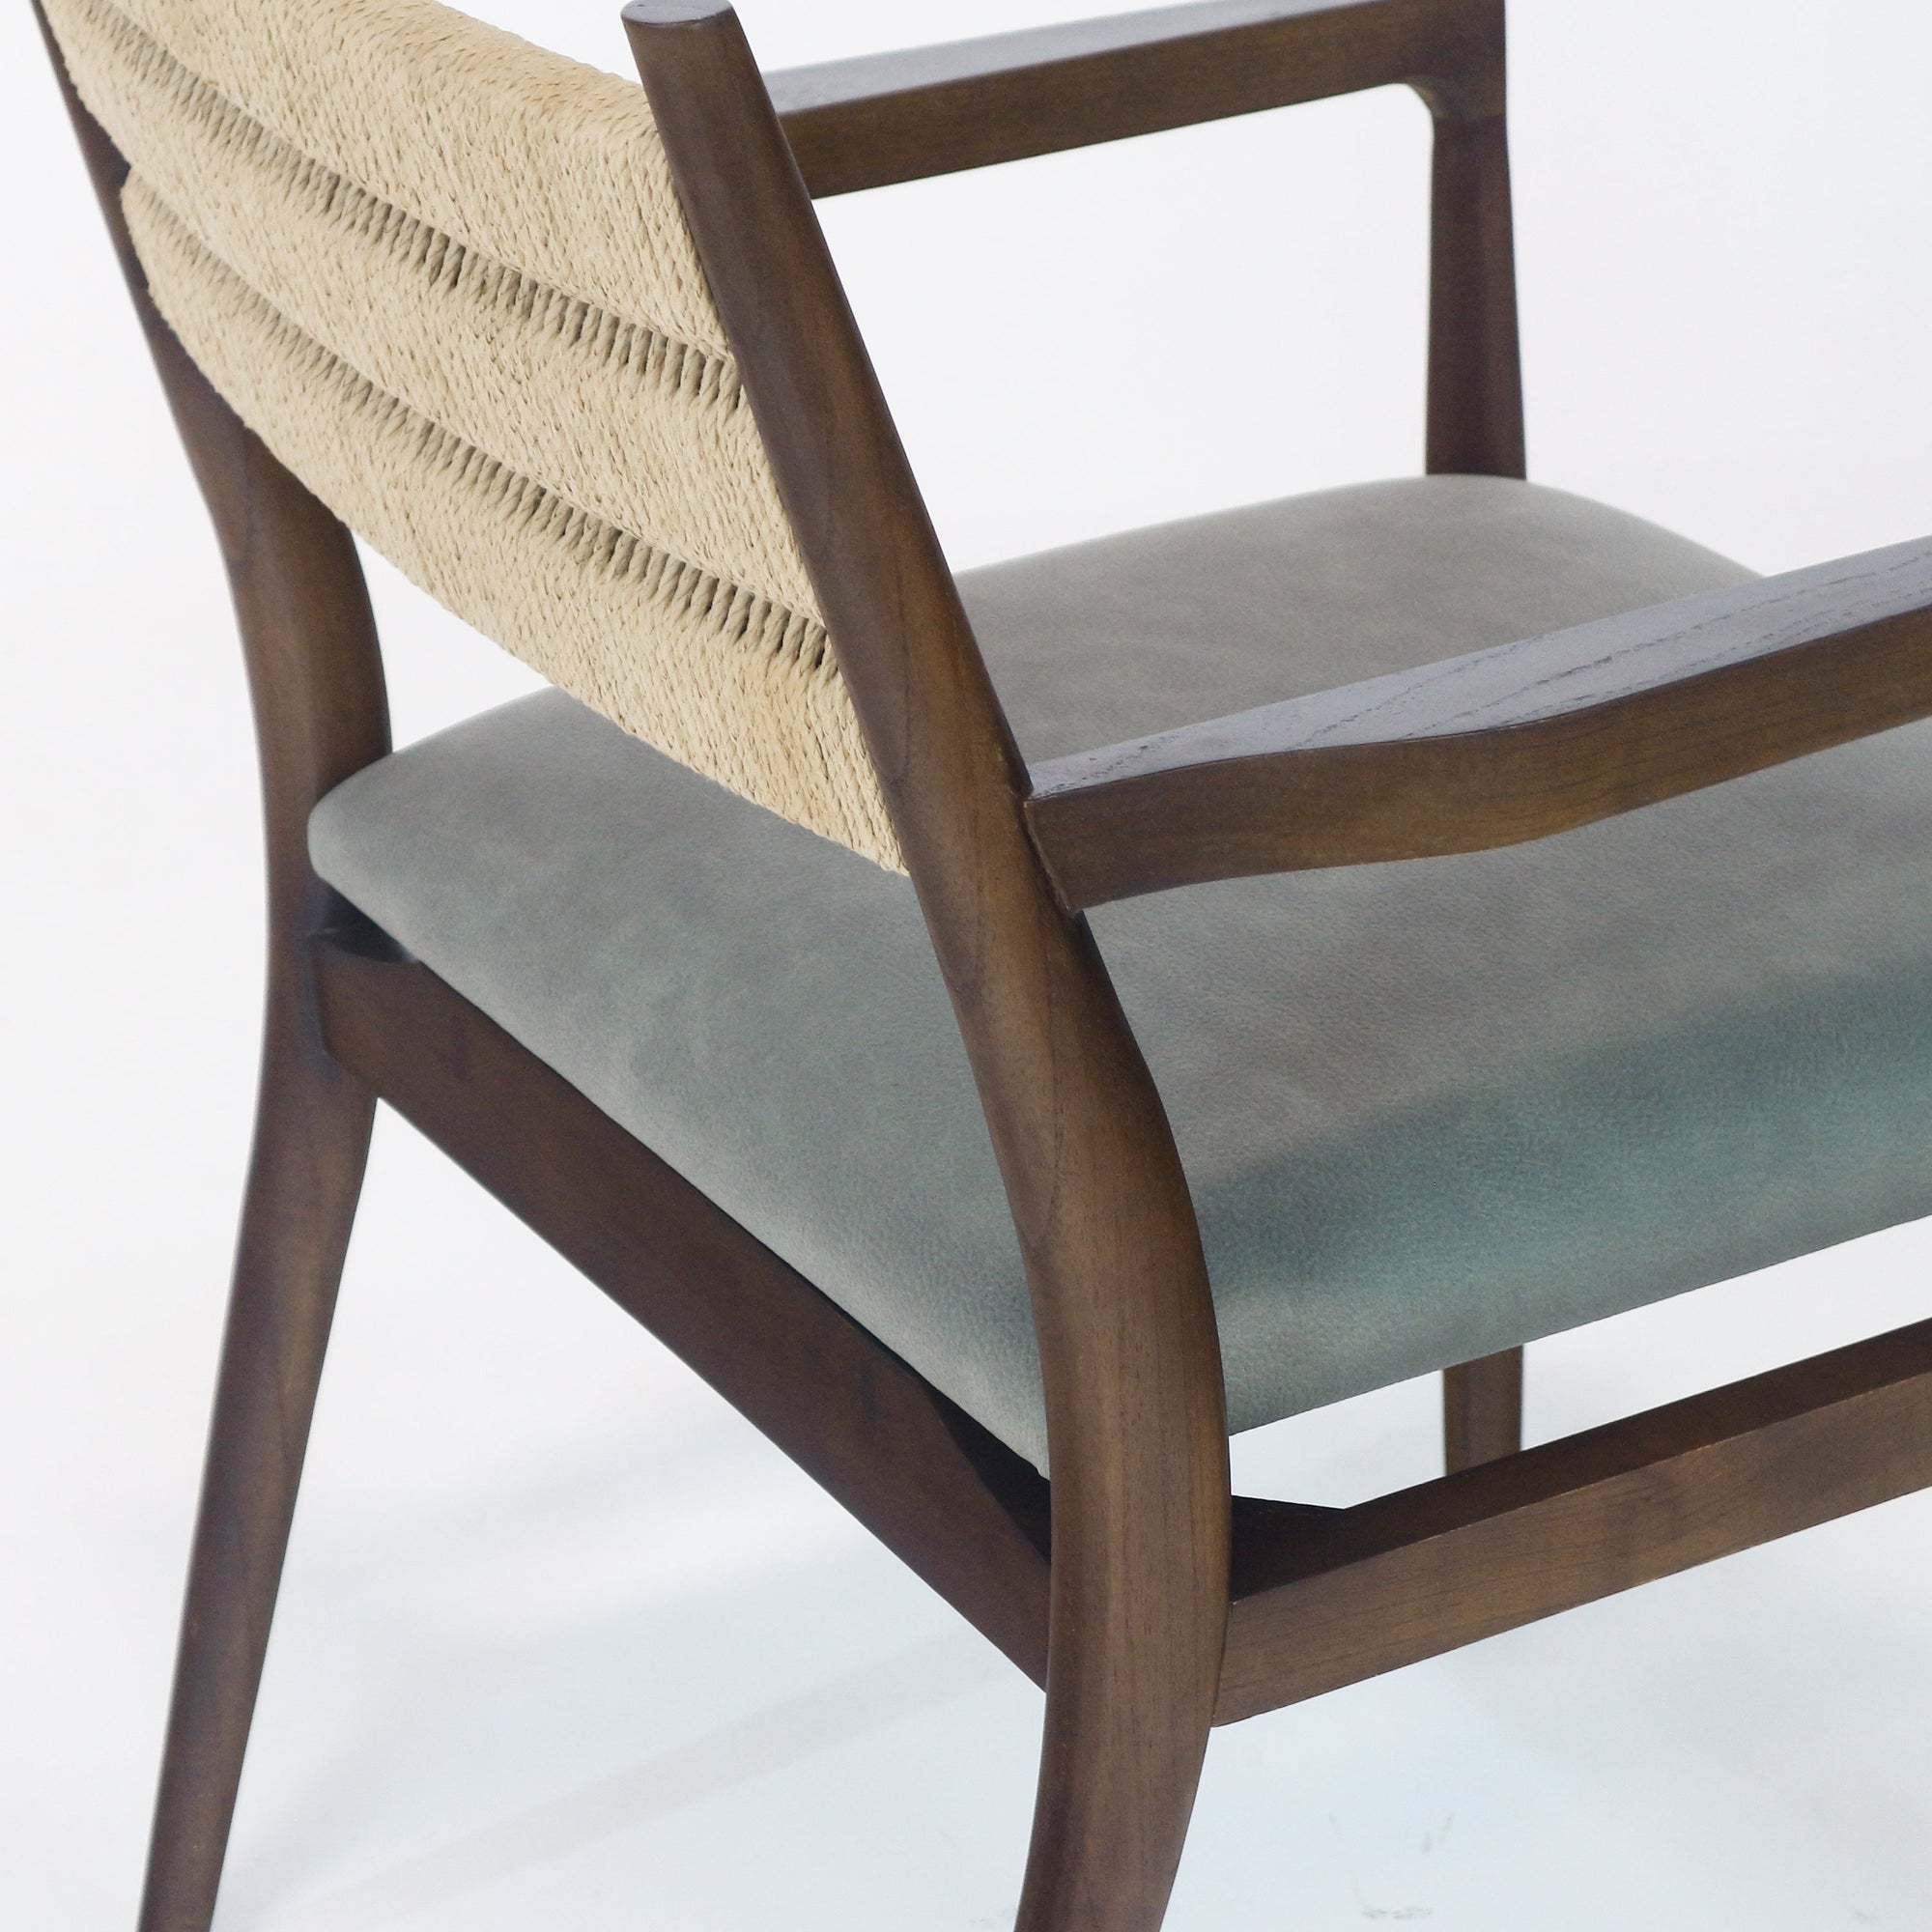 Samsara Dining Chair with Rope Backrest with Blue Leather Seat